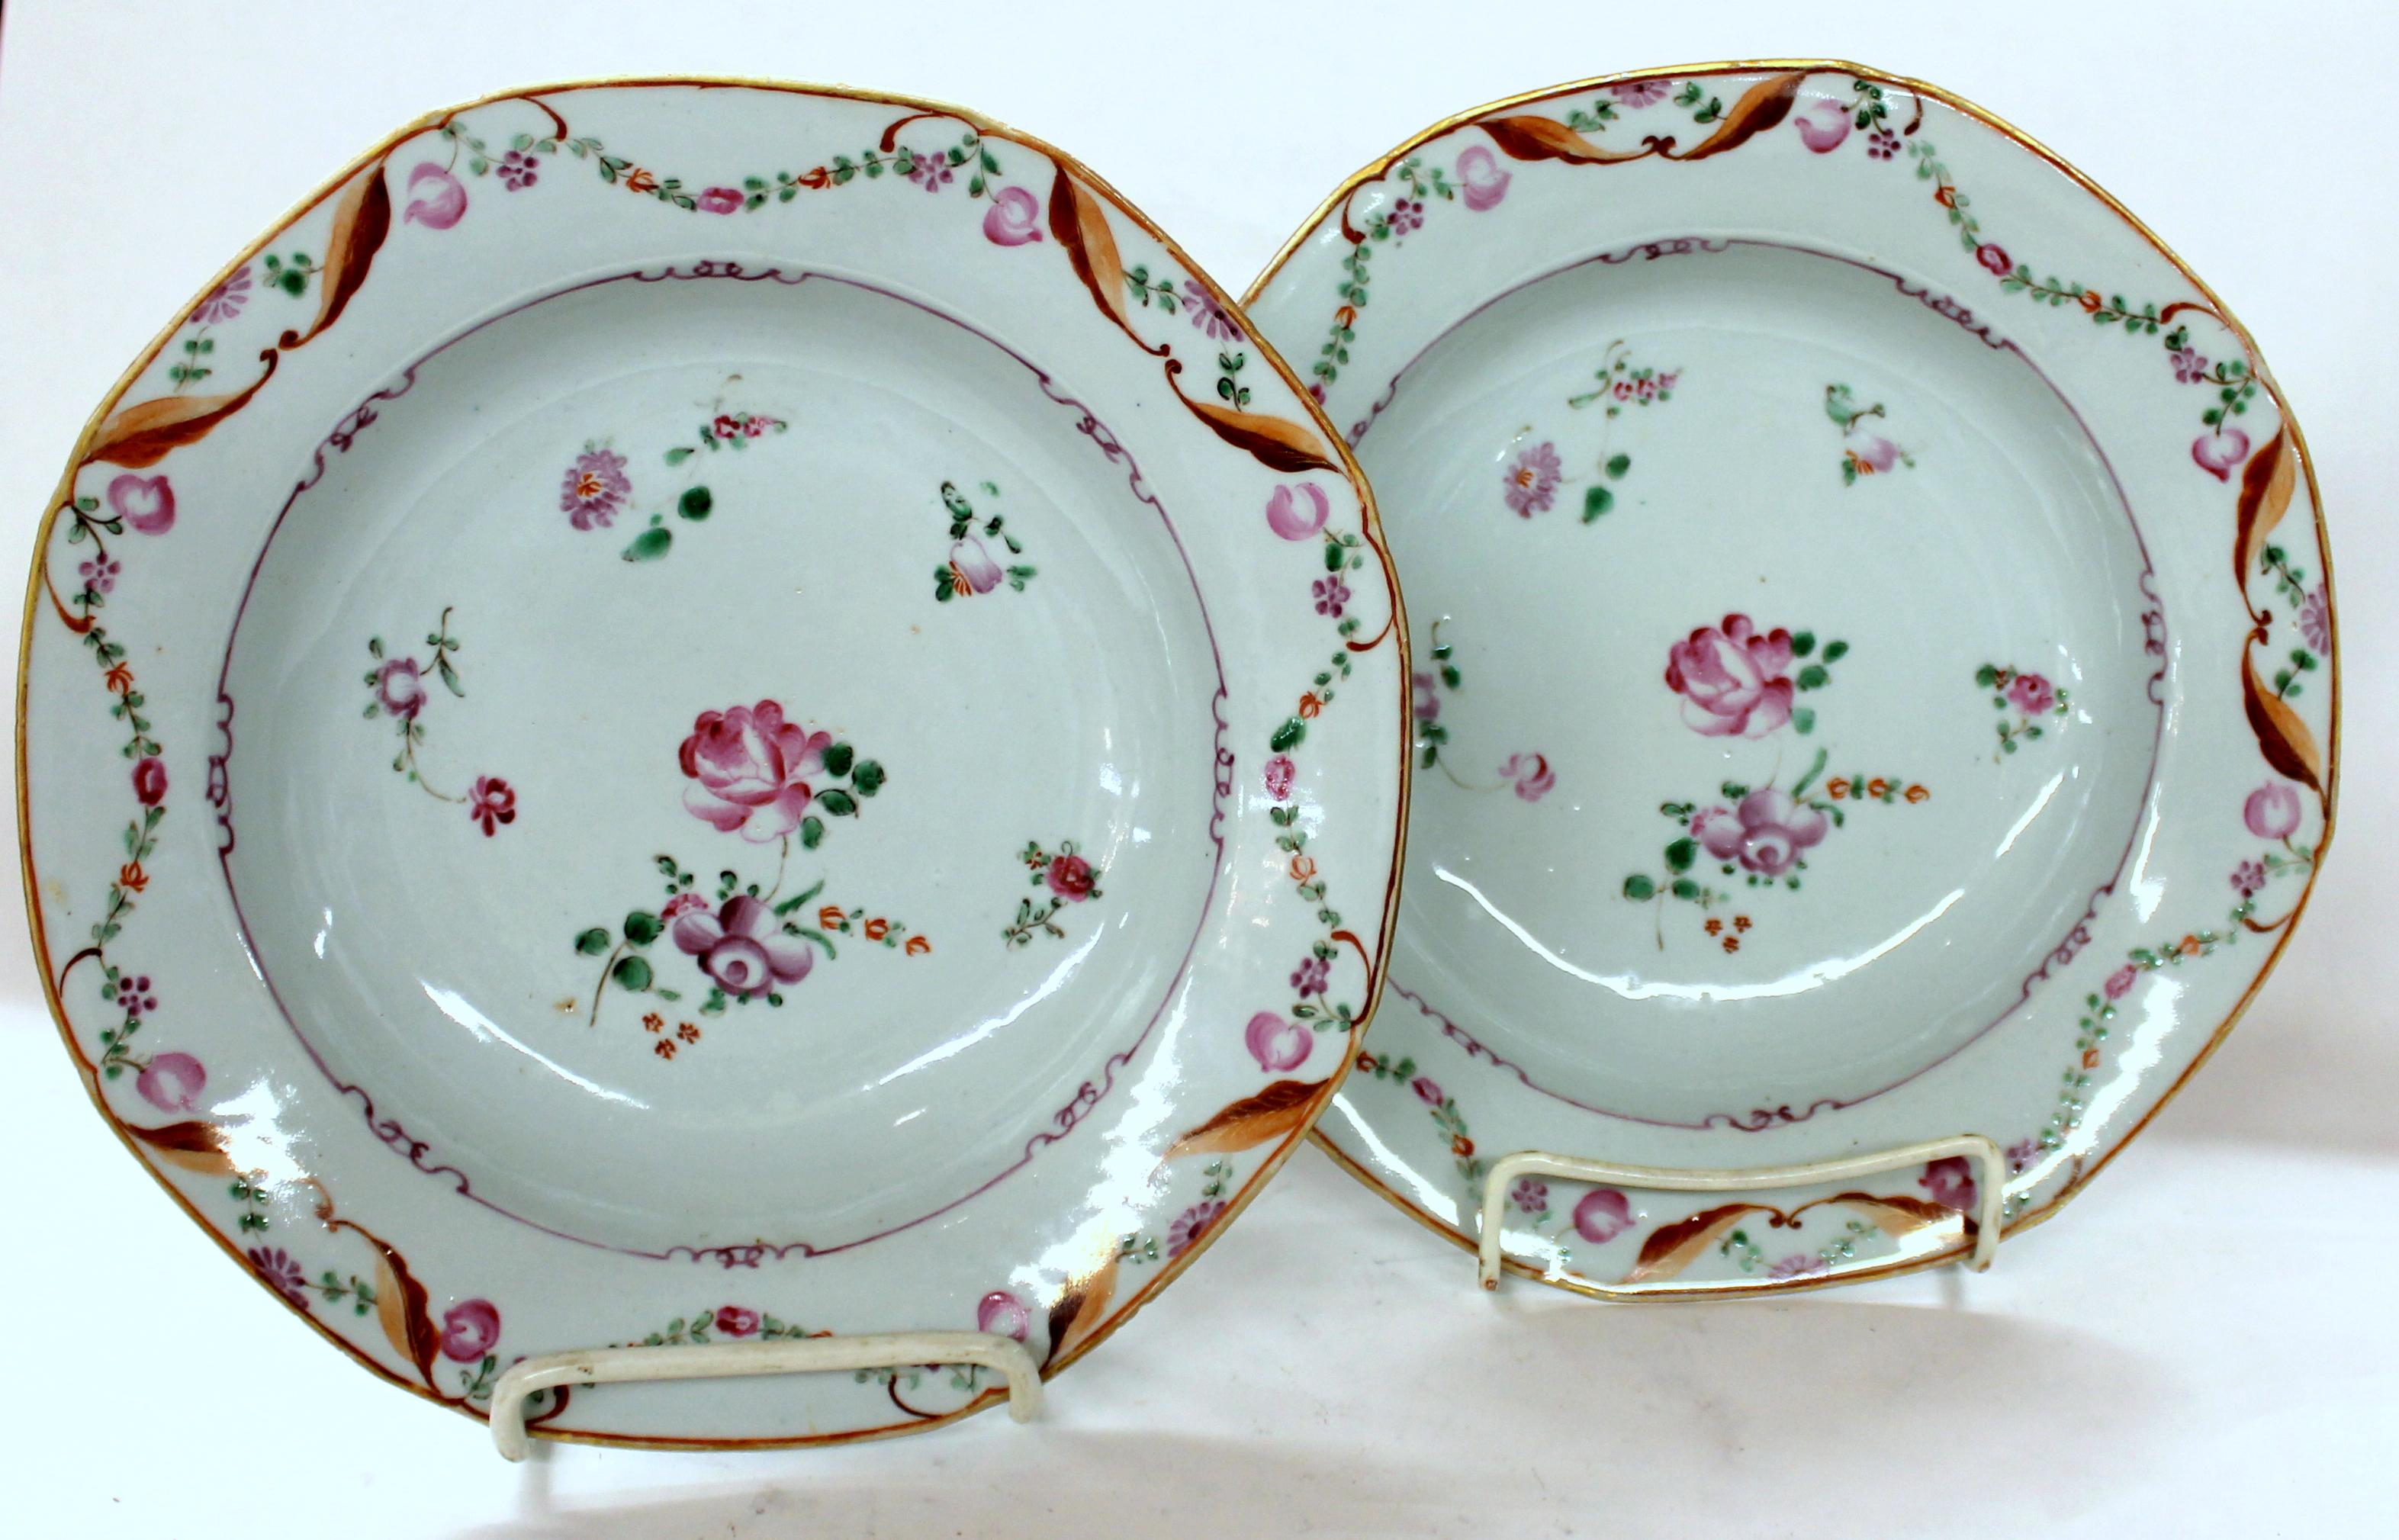 Pair of exceptional antique English late 18th century 